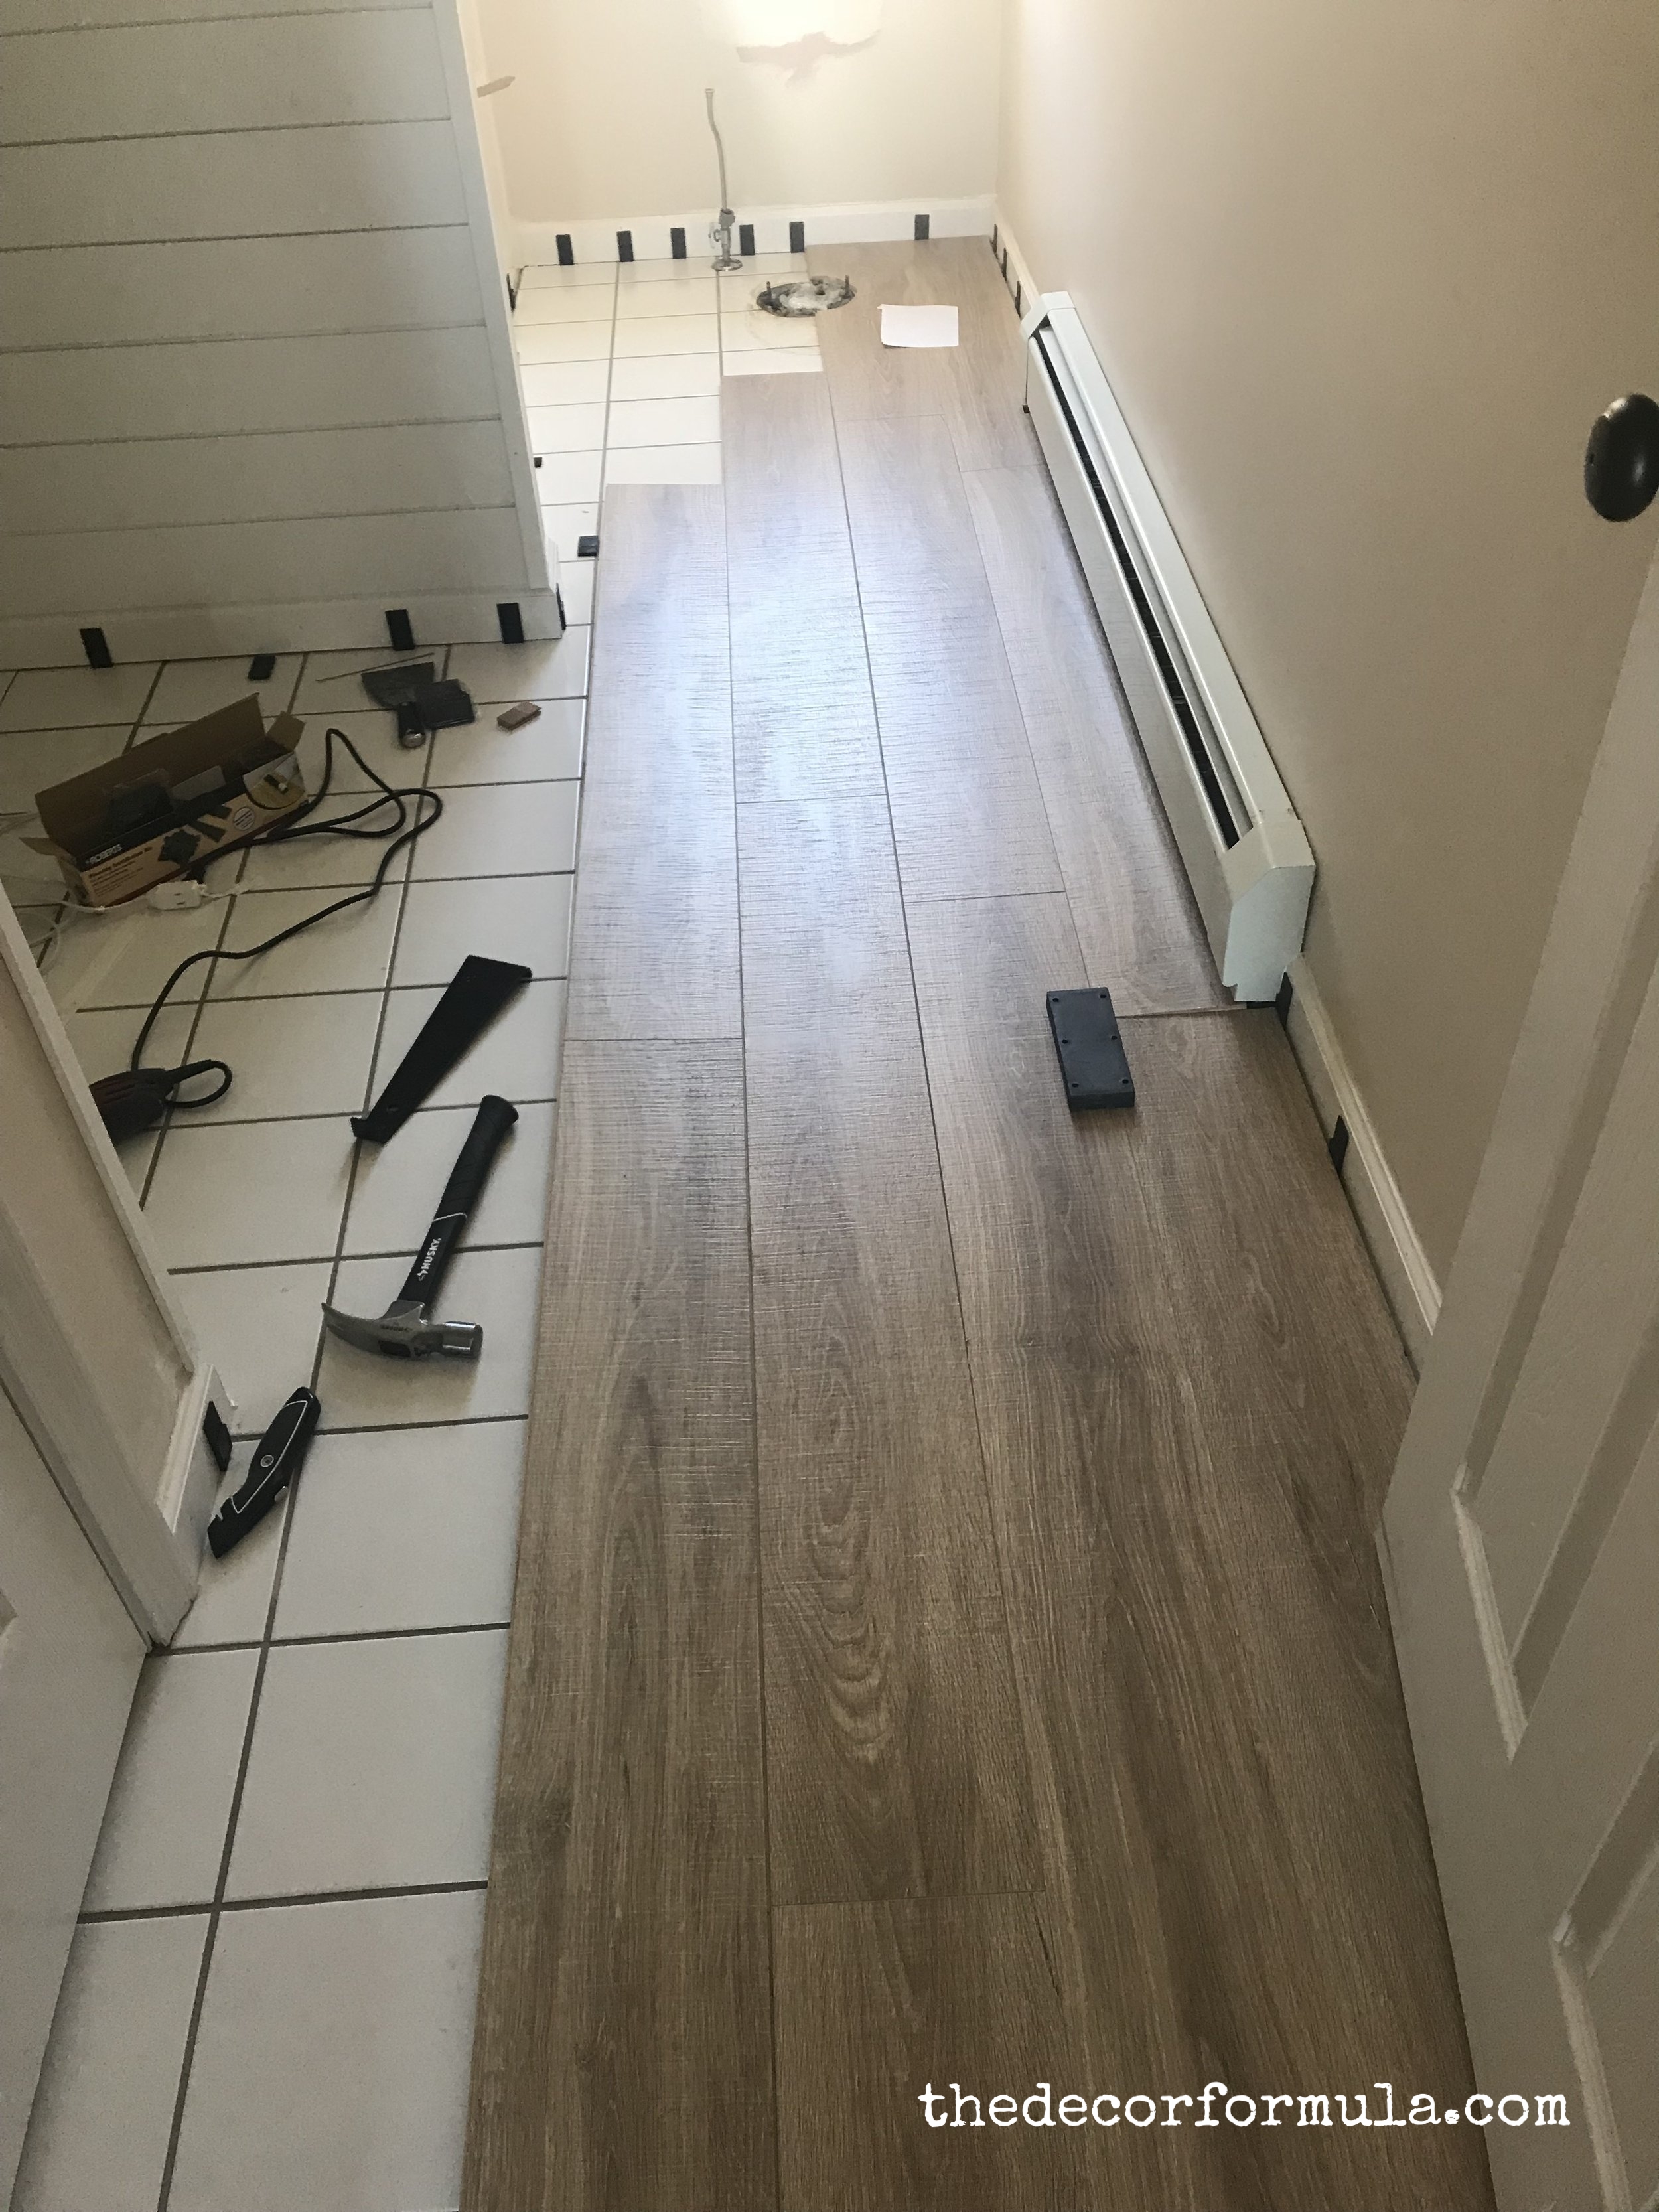 Ideas For Covering Up Tile Floors, Can I Lay Laminate Flooring Over Tiles